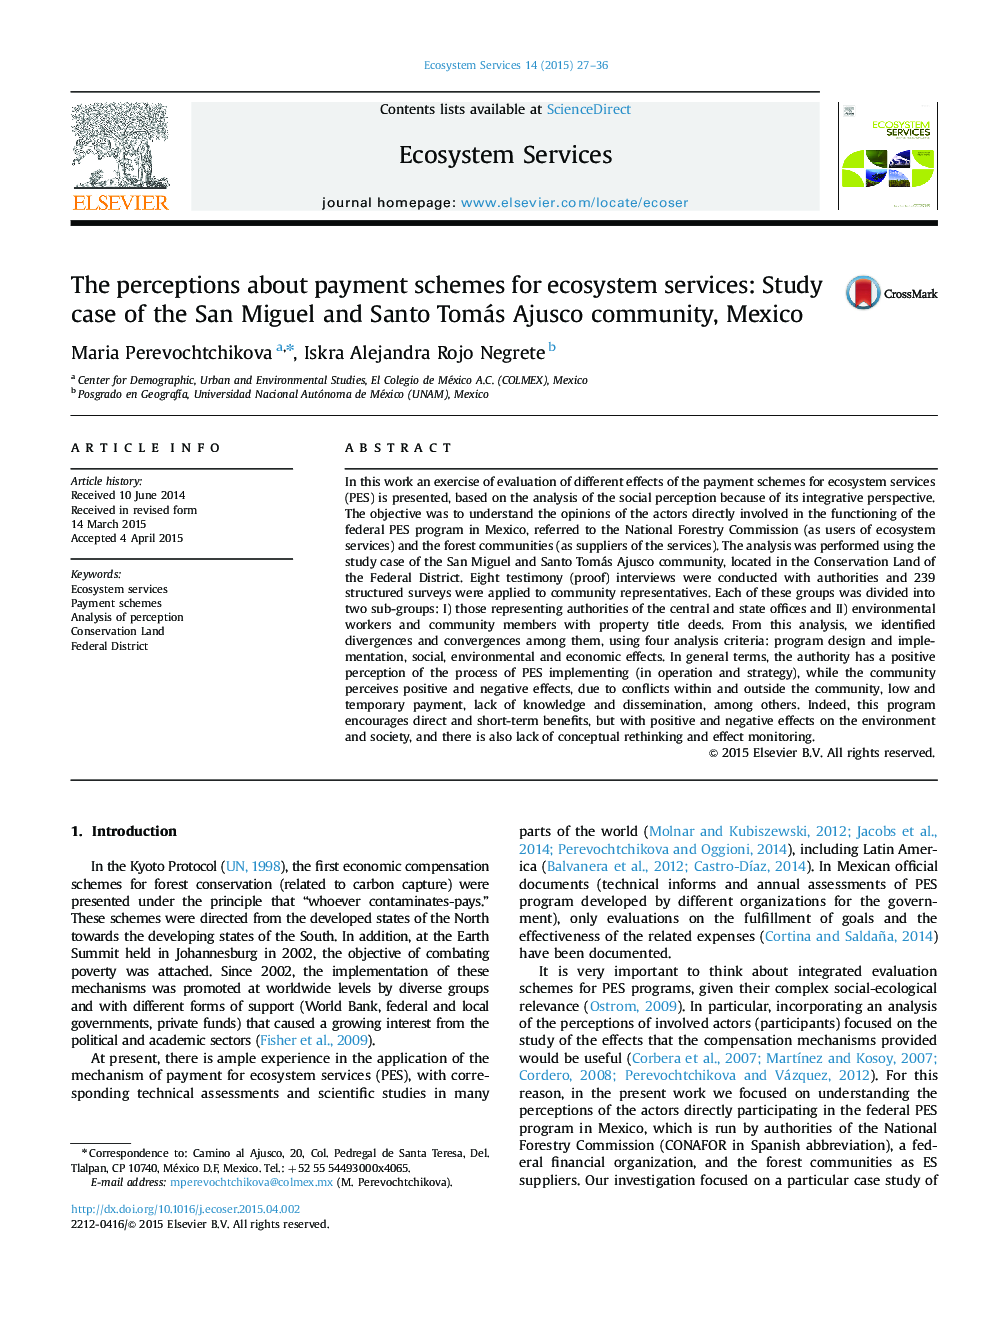 The perceptions about payment schemes for ecosystem services: Study case of the San Miguel and Santo Tomás Ajusco community, Mexico